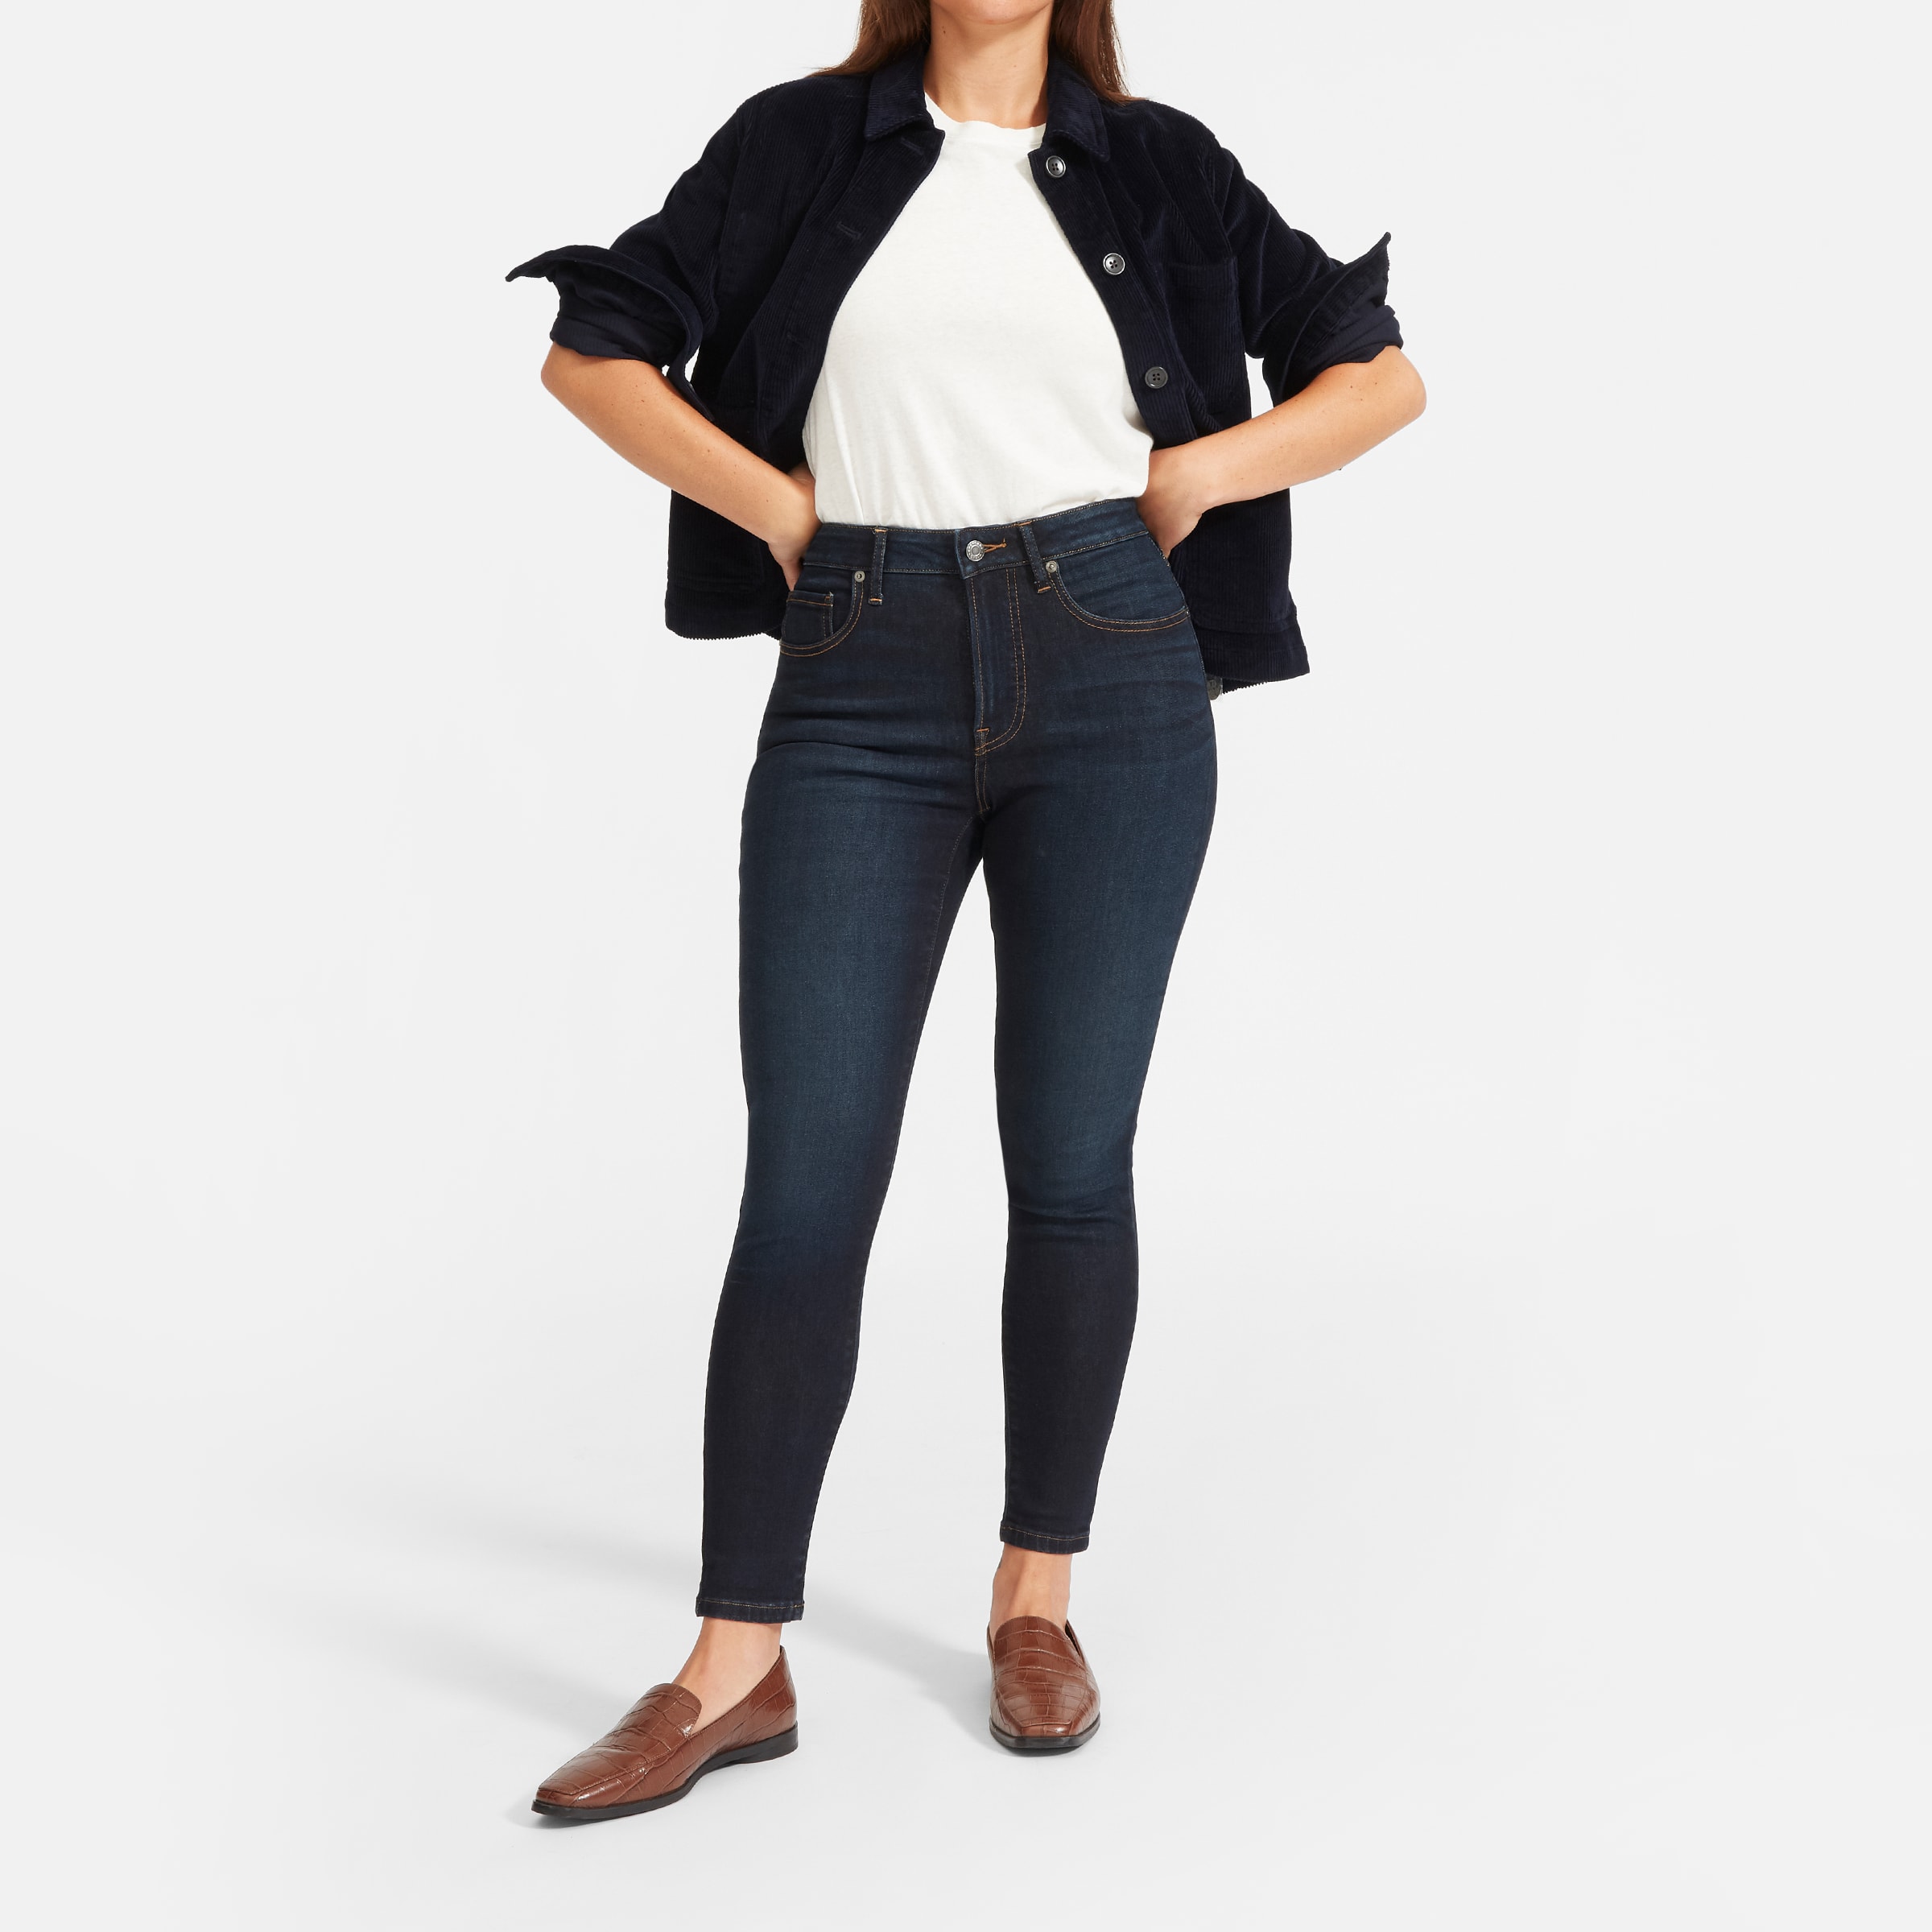 The Curvy Authentic Stretch High-Rise Skinny Jean